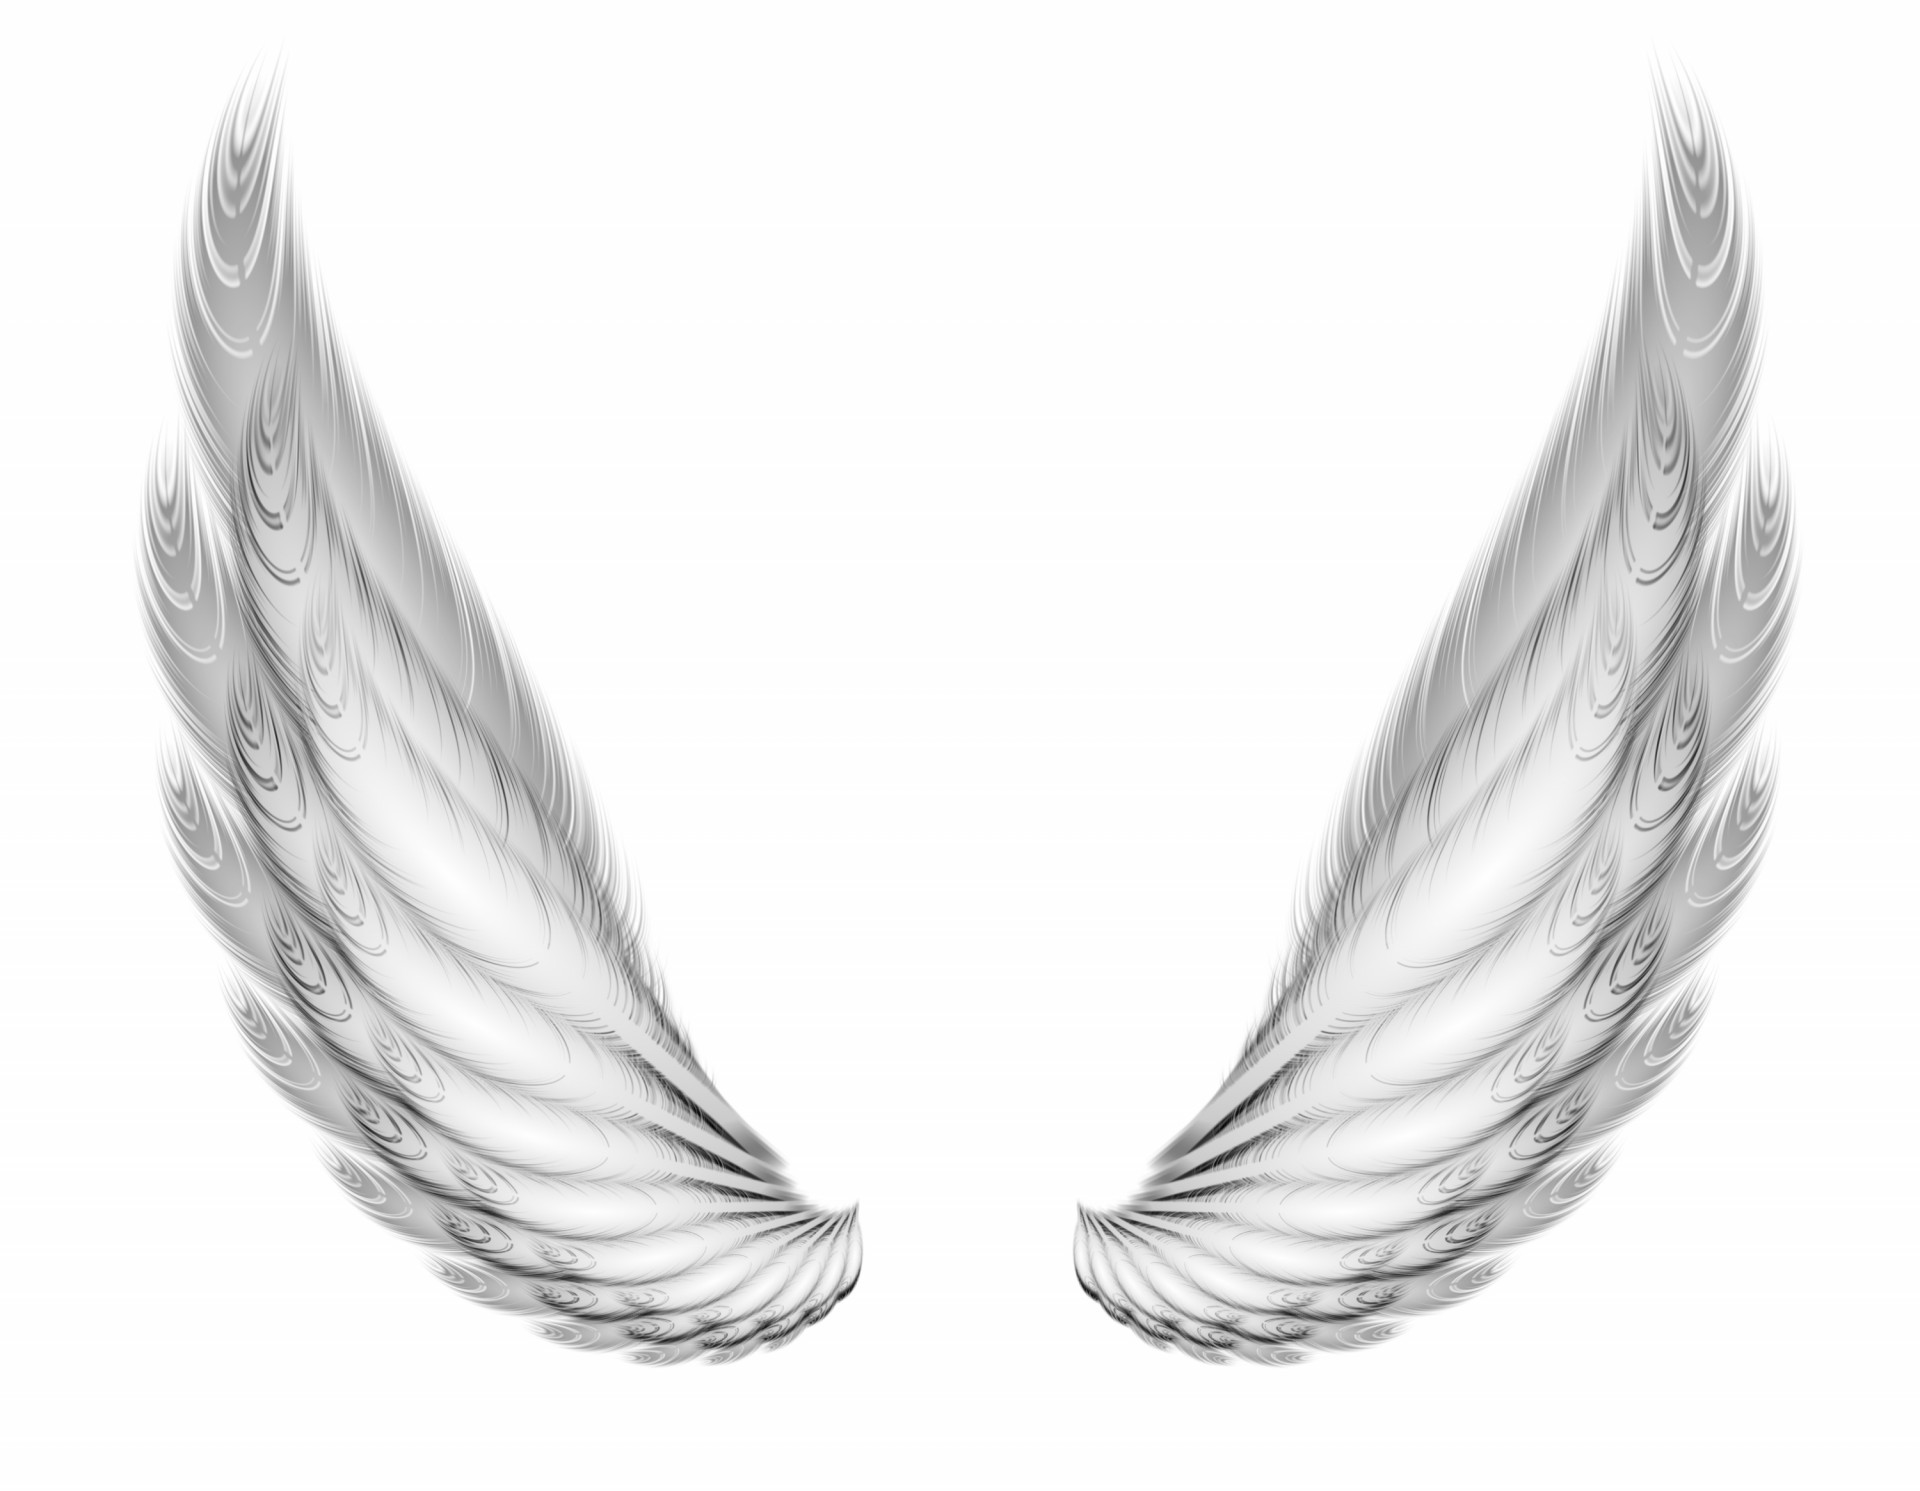 Two Wings